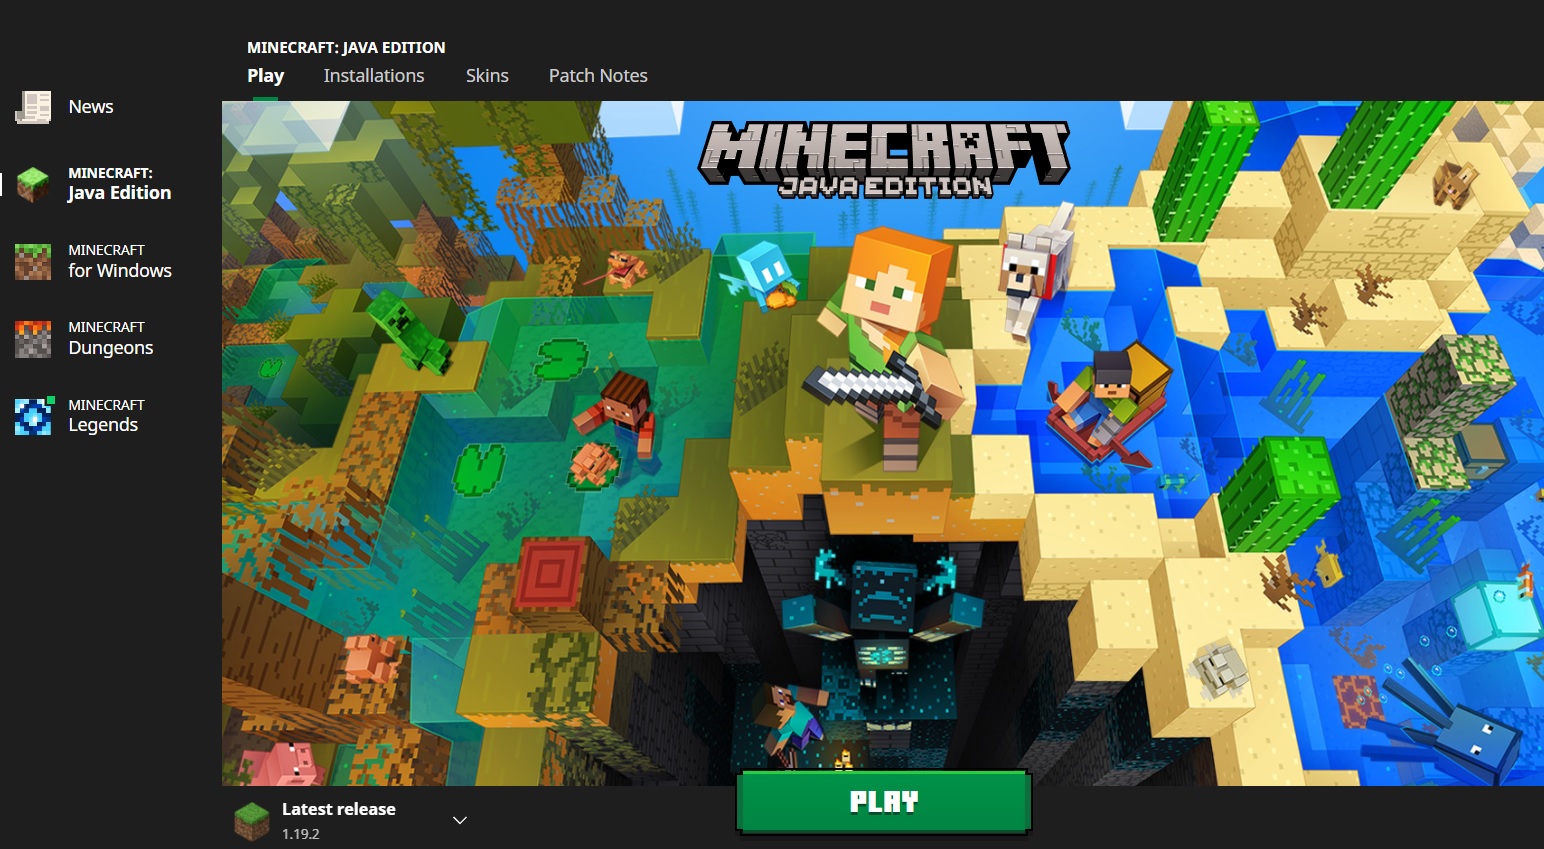 download Minecraft launcher - A launcher interface showing a Minecraft Java main screen with options for 